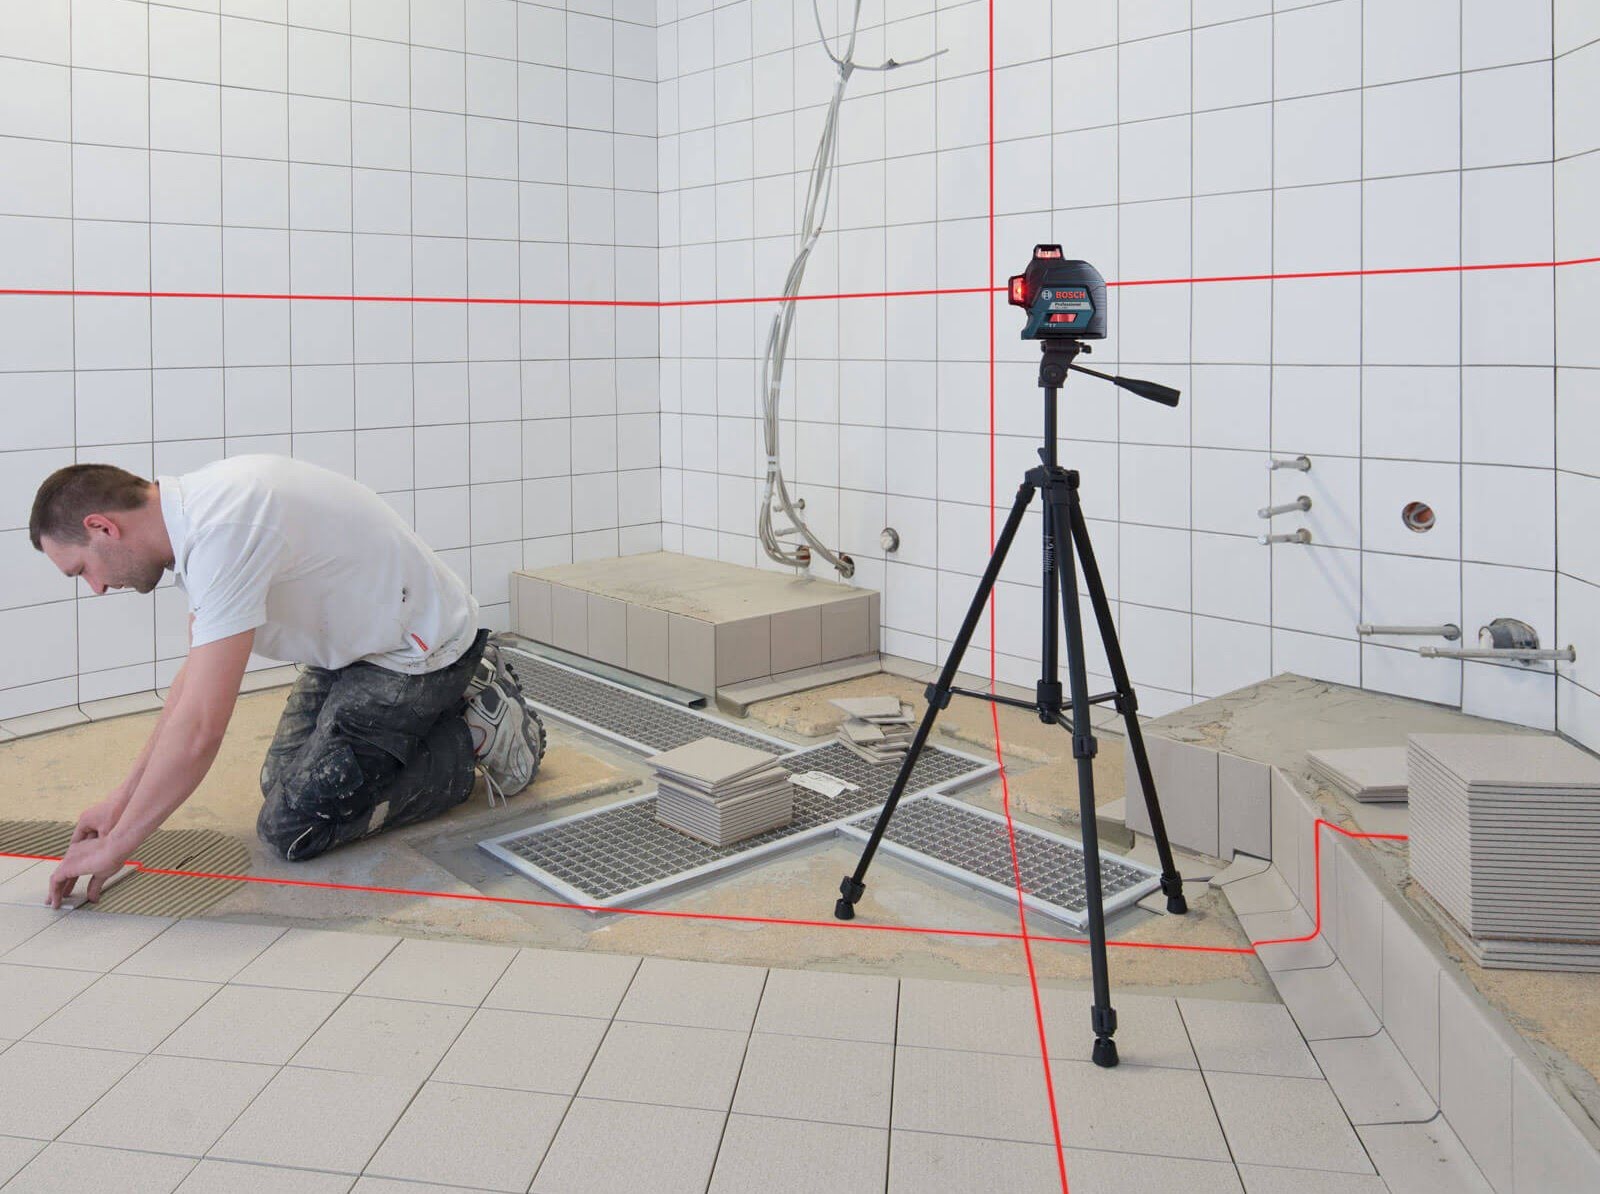 How To Level A Laser Level Tripod